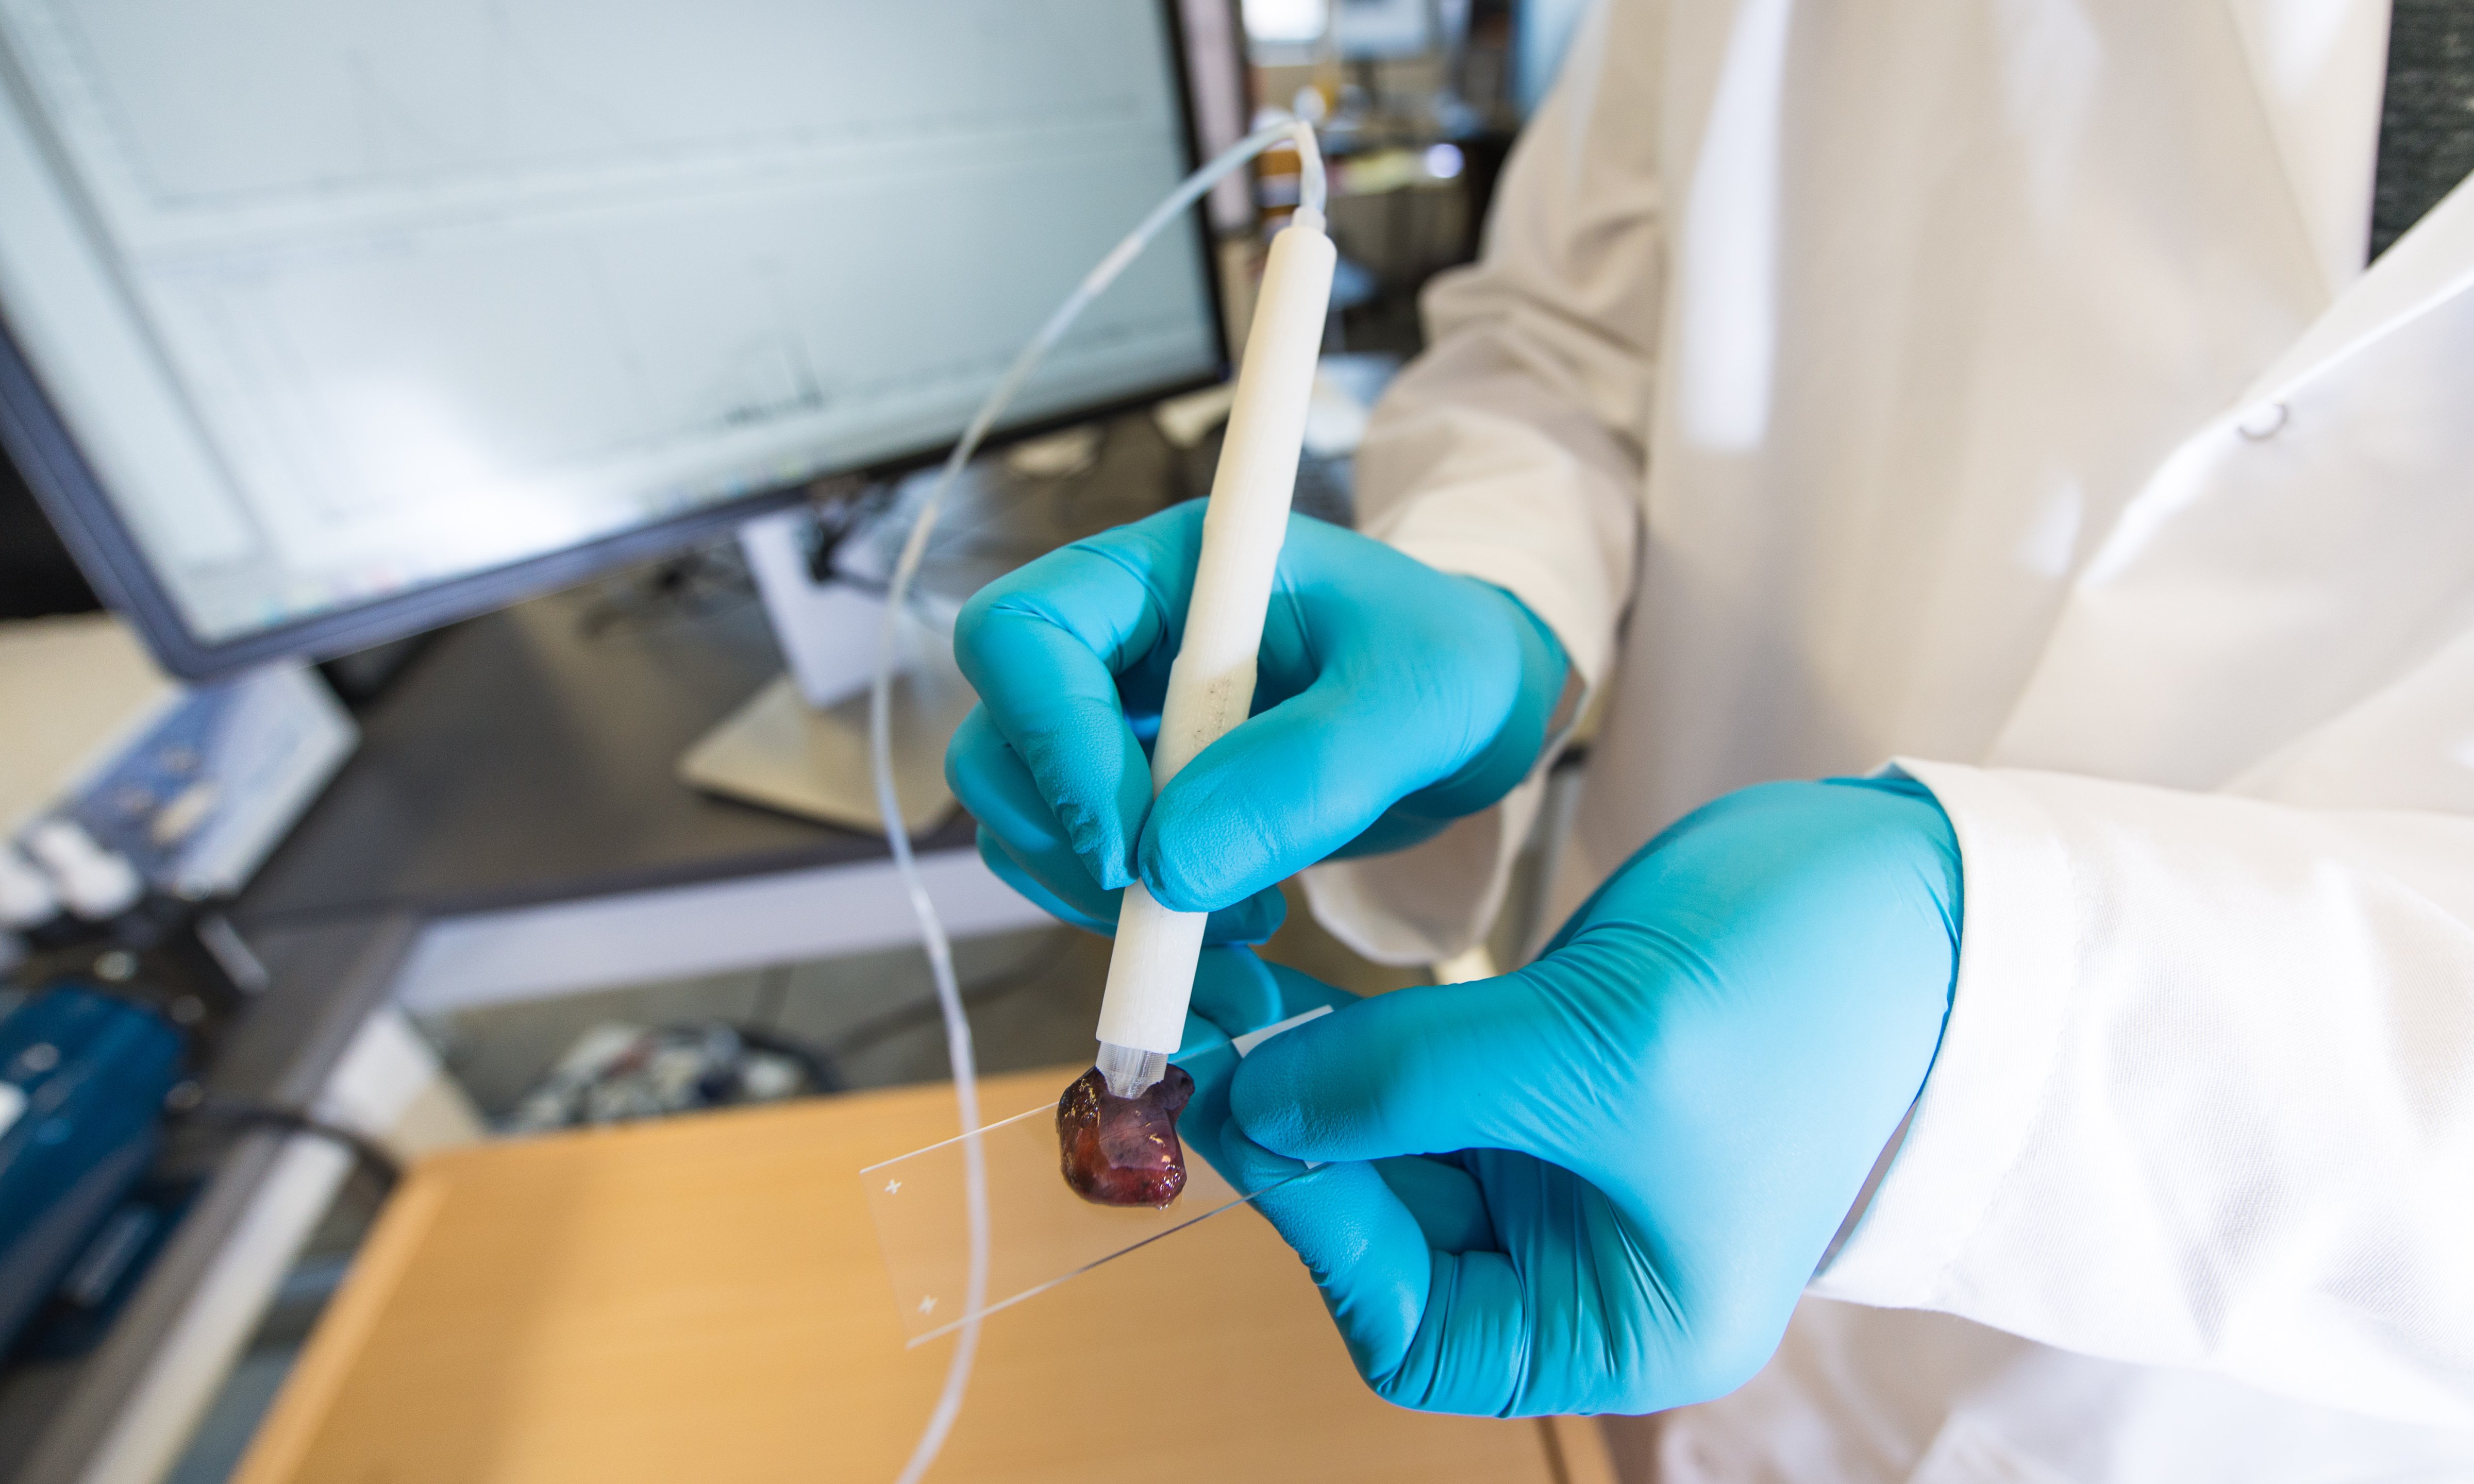 The MasSpec Pen is a handheld probe that can non-destructively analyze human tissue samples to identify cancer. (Vivian Abagiu/Univ. of Texas at Austin)